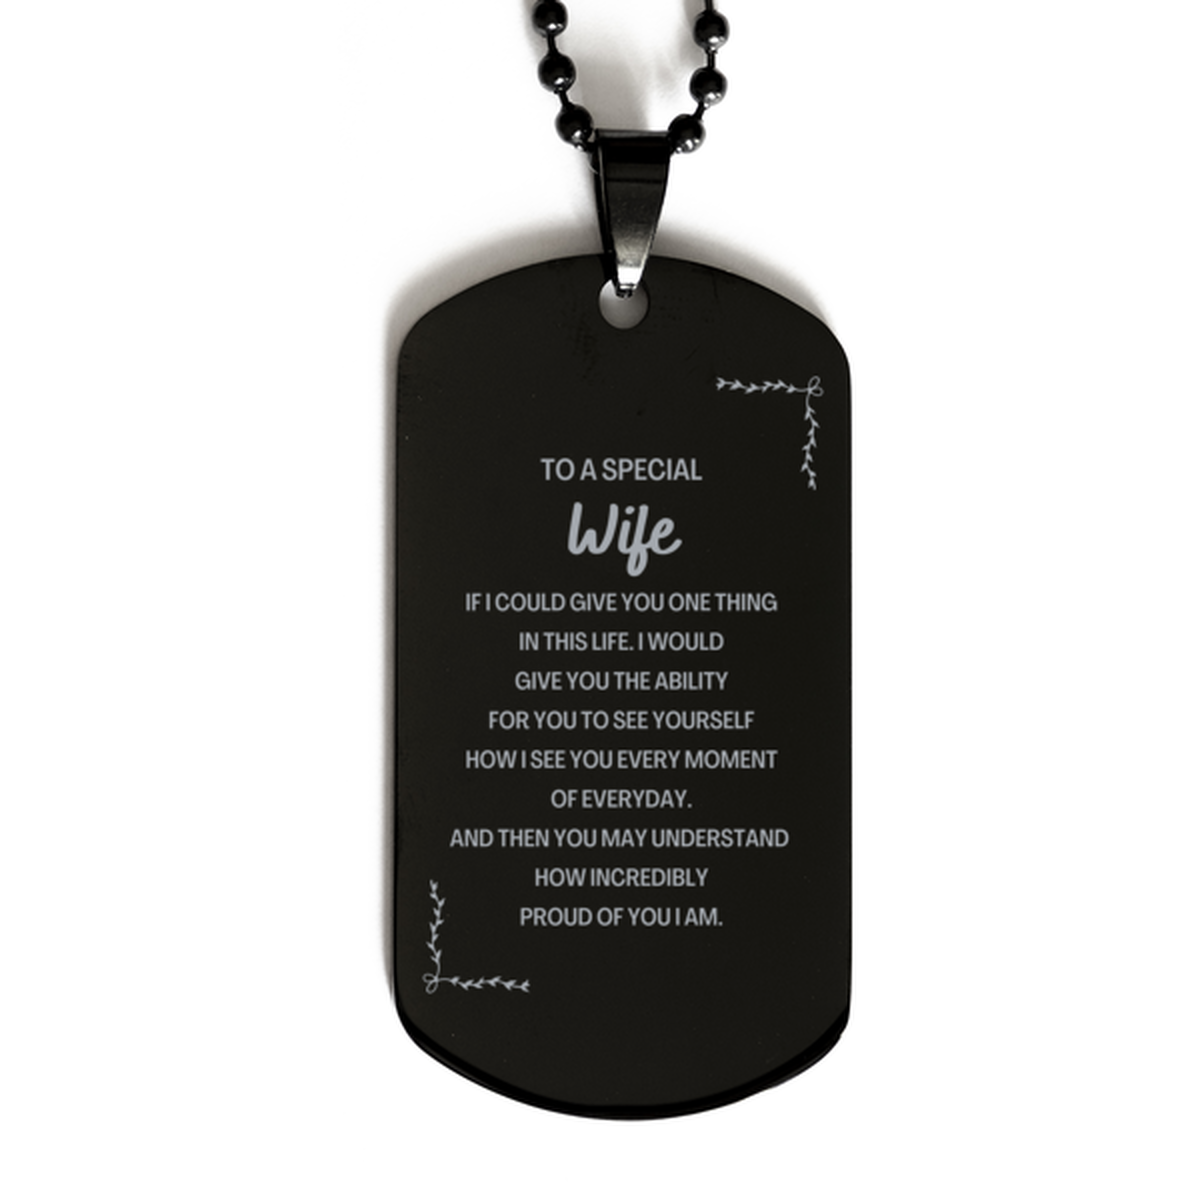 To My Wife Black Dog Tag, Gifts For Wife Engraved, Inspirational Gifts for Christmas Birthday, Epic Gifts for Wife To A Special Wife how incredibly proud of you I am